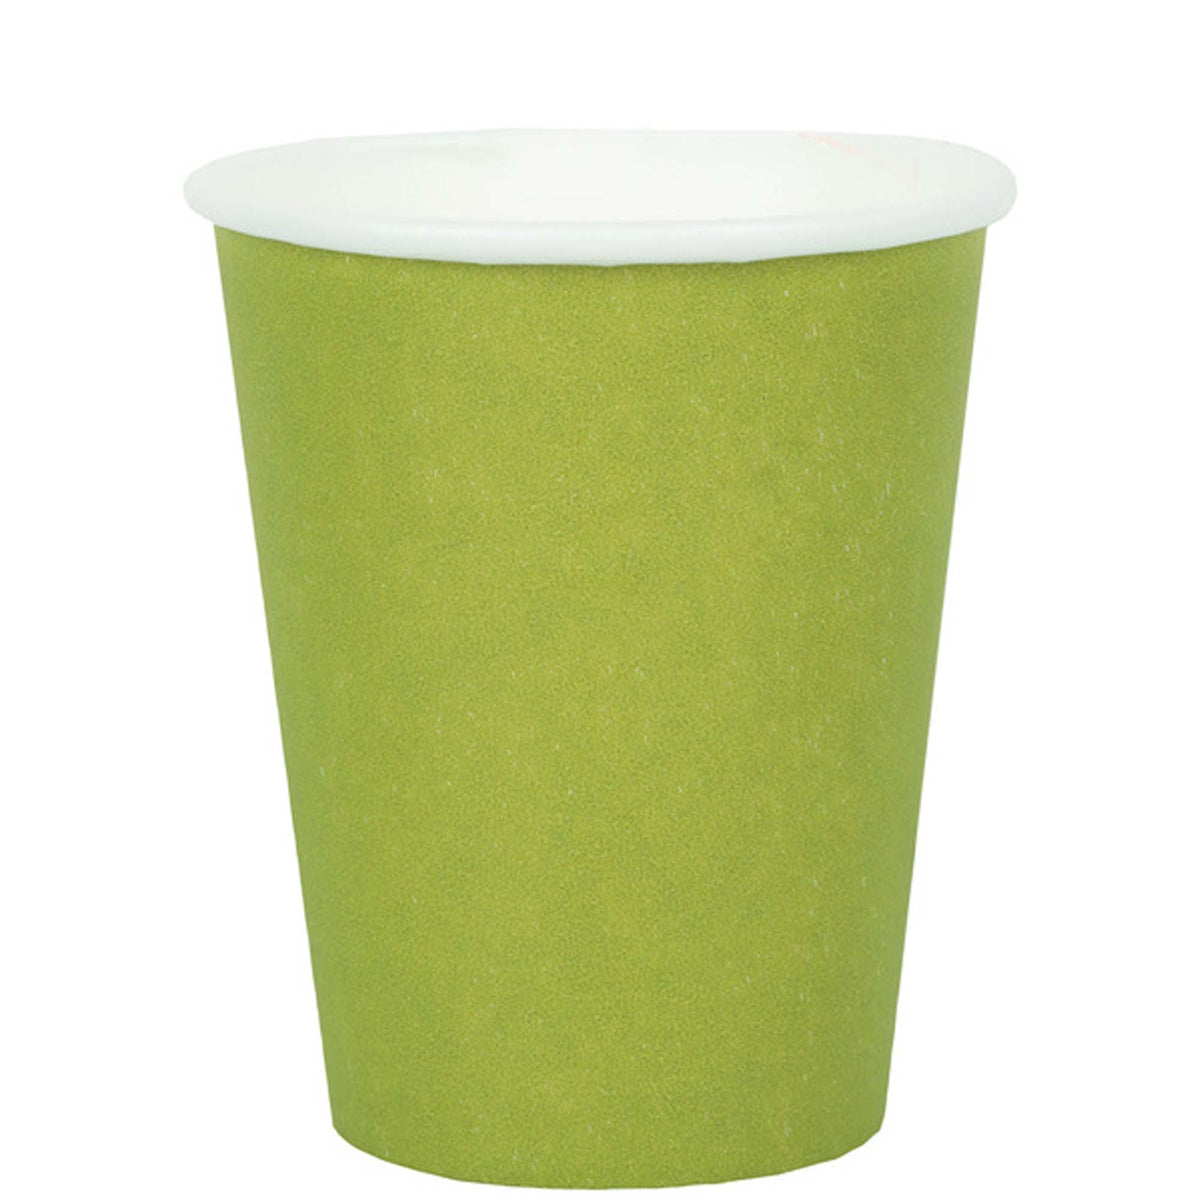 SANTEX Everyday Entertaining Kiwi Green Party Paper Cups, 9 Oz, 10 Count 3660380072904